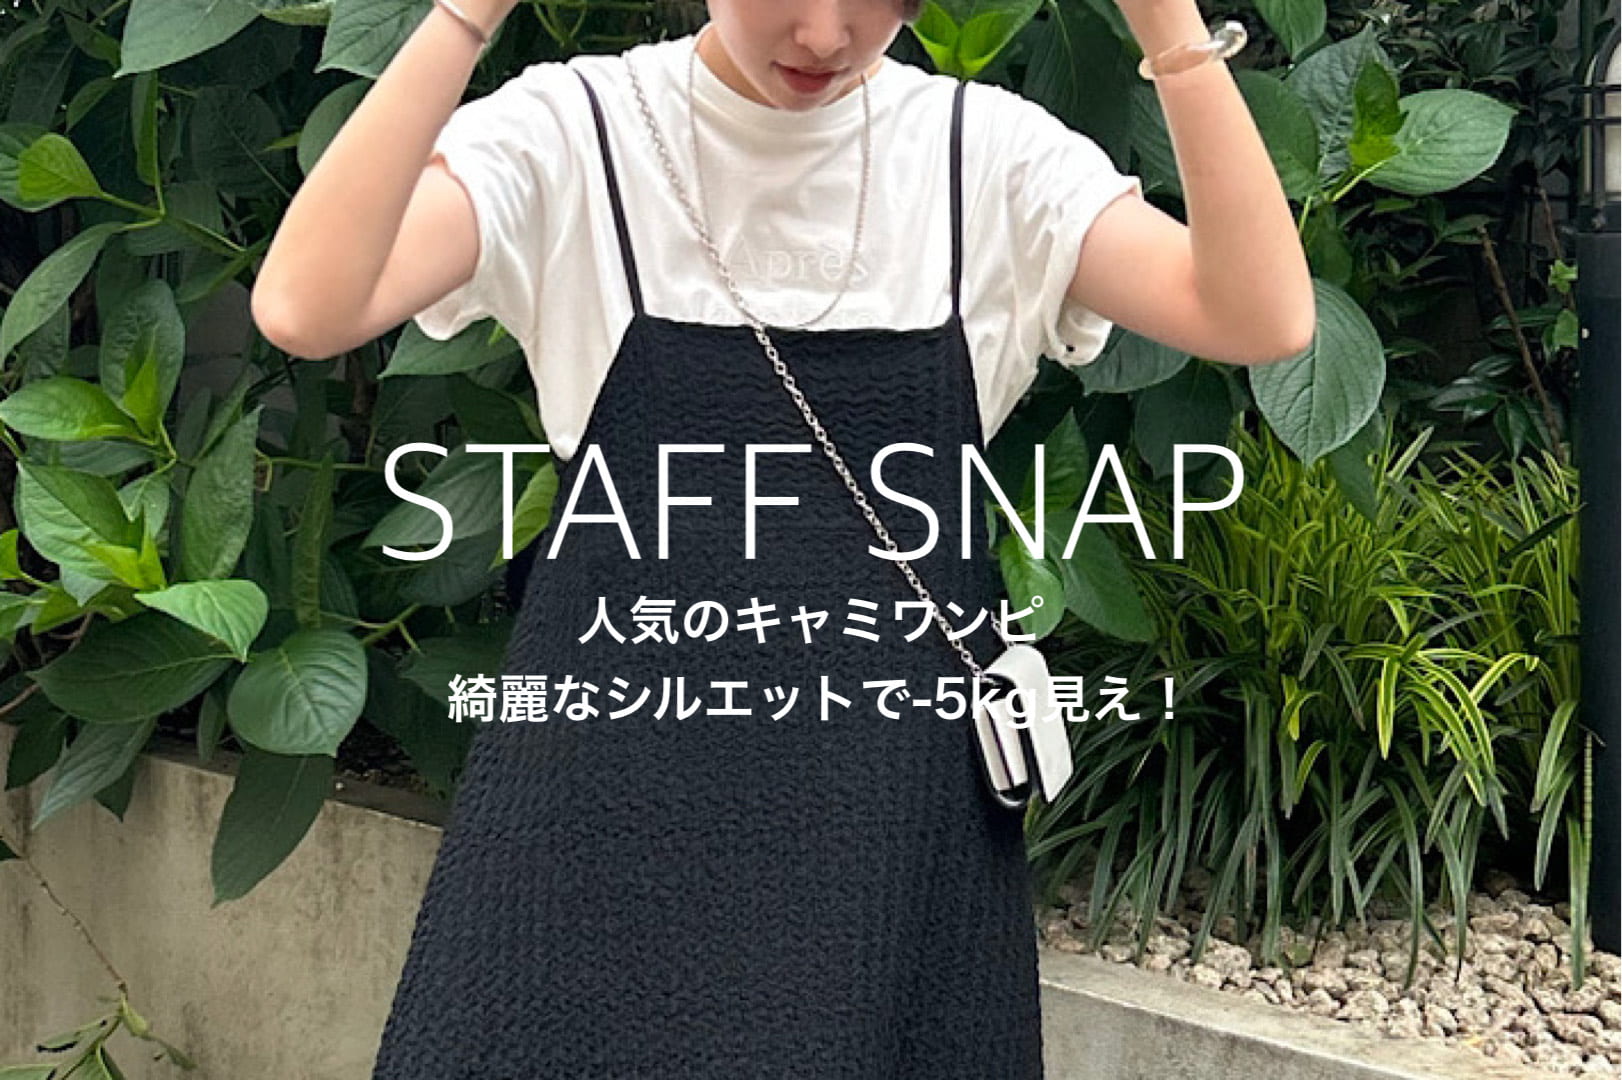 Pal collection 【STAFF SNAP】-5kg見え！人気のキャミワンピはコレ！